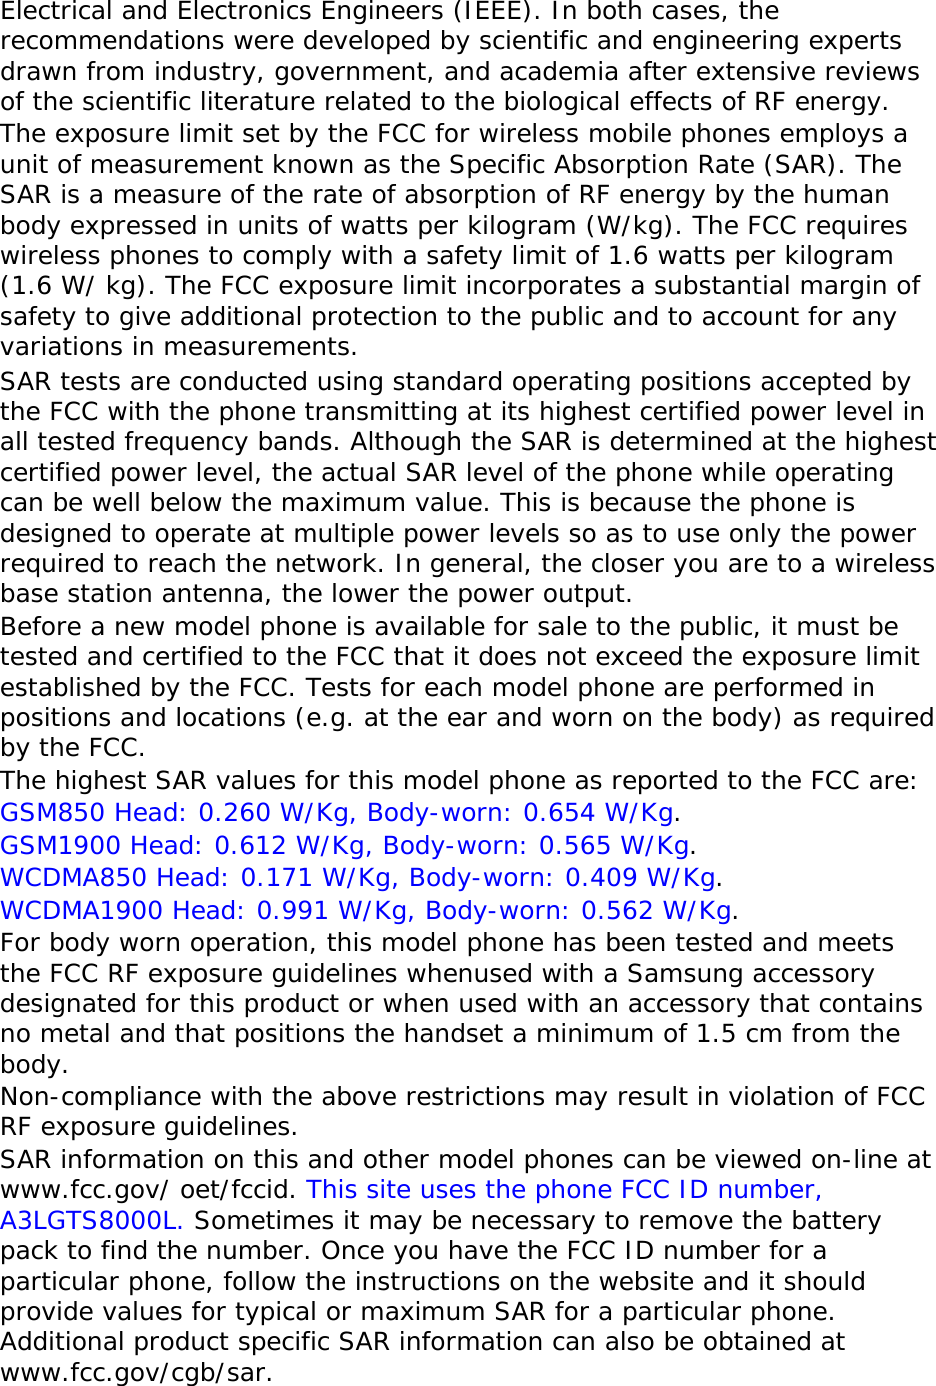 Electrical and Electronics Engineers (IEEE). In both cases, the recommendations were developed by scientific and engineering experts drawn from industry, government, and academia after extensive reviews of the scientific literature related to the biological effects of RF energy. The exposure limit set by the FCC for wireless mobile phones employs a unit of measurement known as the Specific Absorption Rate (SAR). The SAR is a measure of the rate of absorption of RF energy by the human body expressed in units of watts per kilogram (W/kg). The FCC requires wireless phones to comply with a safety limit of 1.6 watts per kilogram (1.6 W/ kg). The FCC exposure limit incorporates a substantial margin of safety to give additional protection to the public and to account for any variations in measurements. SAR tests are conducted using standard operating positions accepted by the FCC with the phone transmitting at its highest certified power level in all tested frequency bands. Although the SAR is determined at the highest certified power level, the actual SAR level of the phone while operating can be well below the maximum value. This is because the phone is designed to operate at multiple power levels so as to use only the power required to reach the network. In general, the closer you are to a wireless base station antenna, the lower the power output. Before a new model phone is available for sale to the public, it must be tested and certified to the FCC that it does not exceed the exposure limit established by the FCC. Tests for each model phone are performed in positions and locations (e.g. at the ear and worn on the body) as required by the FCC.   The highest SAR values for this model phone as reported to the FCC are:  GSM850 Head: 0.260 W/Kg, Body-worn: 0.654 W/Kg. GSM1900 Head: 0.612 W/Kg, Body-worn: 0.565 W/Kg. WCDMA850 Head: 0.171 W/Kg, Body-worn: 0.409 W/Kg. WCDMA1900 Head: 0.991 W/Kg, Body-worn: 0.562 W/Kg. For body worn operation, this model phone has been tested and meets the FCC RF exposure guidelines whenused with a Samsung accessory designated for this product or when used with an accessory that contains no metal and that positions the handset a minimum of 1.5 cm from the body.  Non-compliance with the above restrictions may result in violation of FCC RF exposure guidelines. SAR information on this and other model phones can be viewed on-line at www.fcc.gov/ oet/fccid. This site uses the phone FCC ID number, A3LGTS8000L. Sometimes it may be necessary to remove the battery pack to find the number. Once you have the FCC ID number for a particular phone, follow the instructions on the website and it should provide values for typical or maximum SAR for a particular phone. Additional product specific SAR information can also be obtained at www.fcc.gov/cgb/sar. 